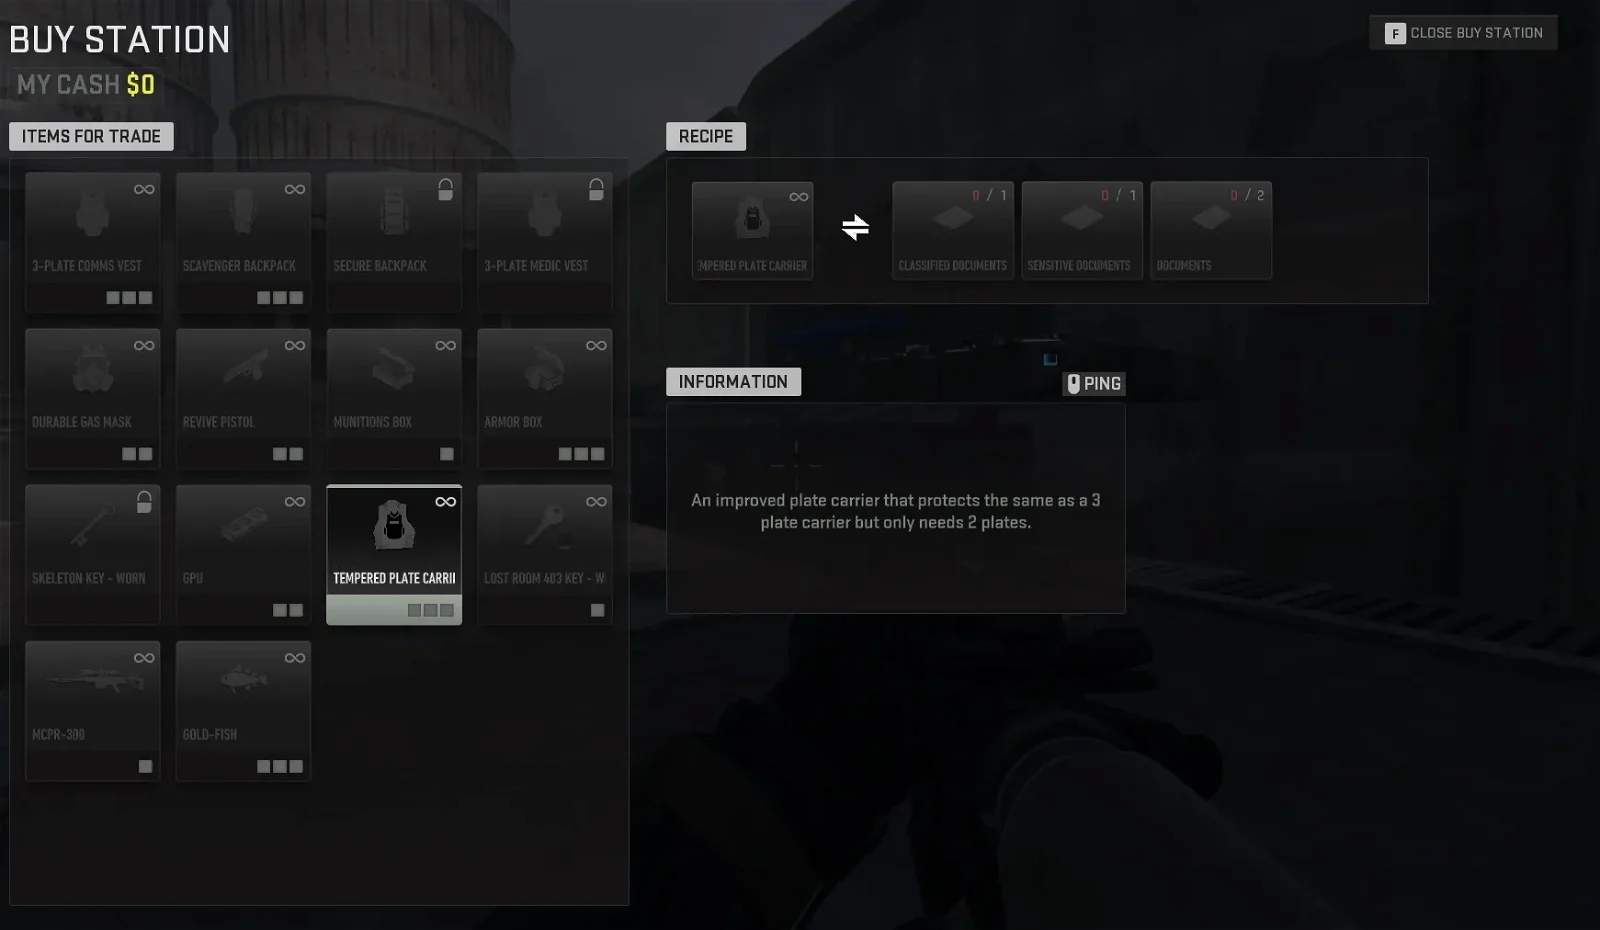 Screenshot 2 All DMZ 3-plate vest Barter recipes: Medic, Comms, Stealth, and Tempered